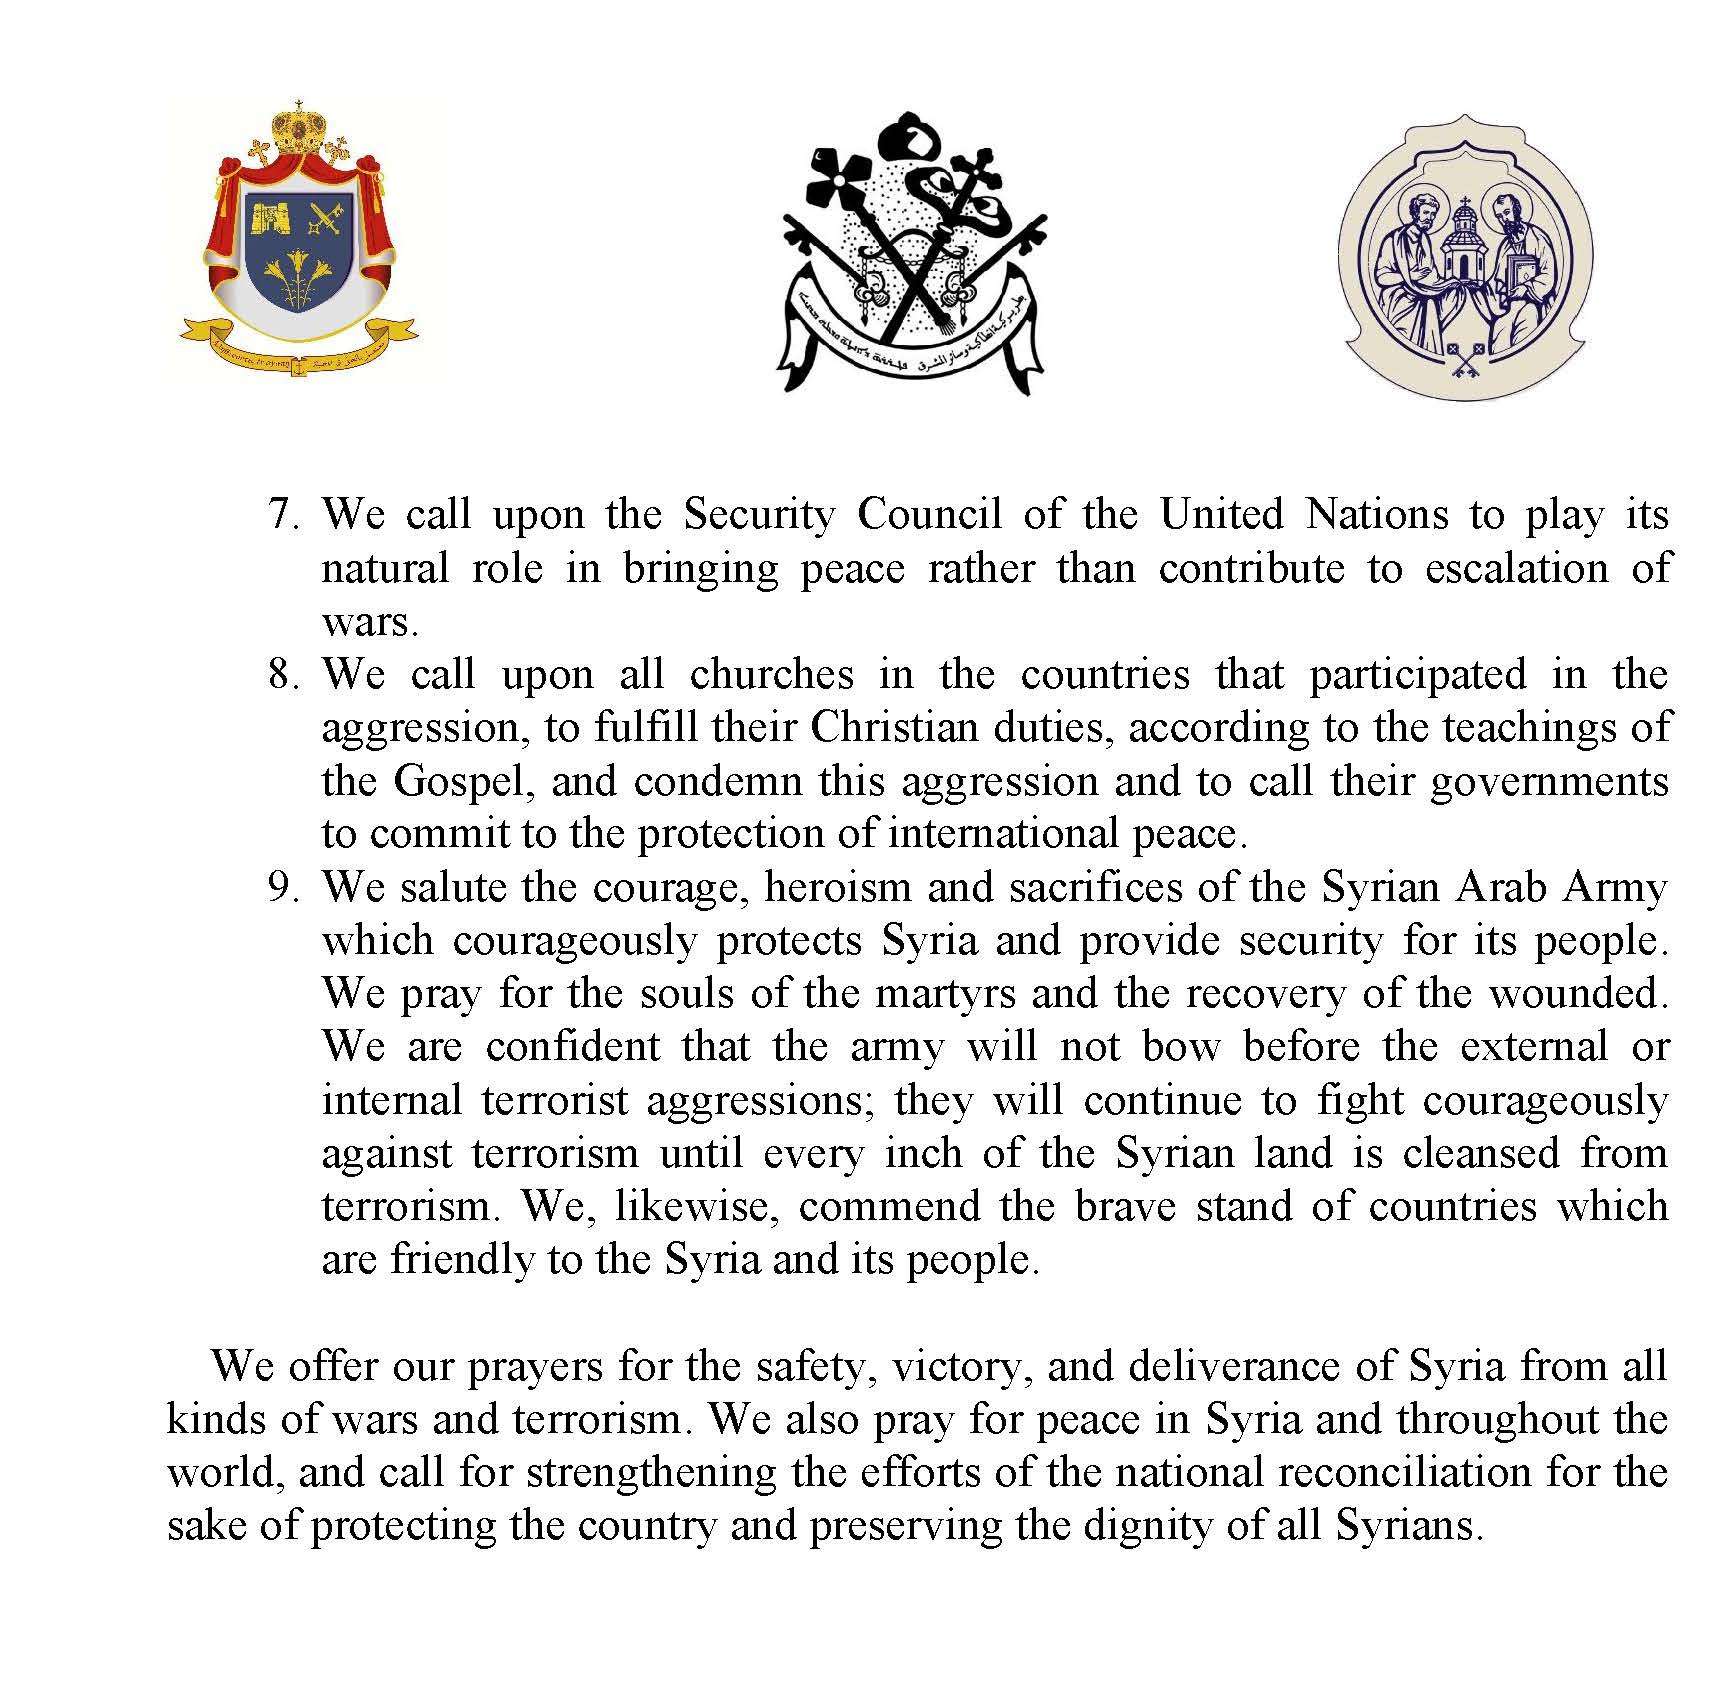 A Statement Issued by the Patriarchates of Antioch and all the East for the Greek Orthodox, Syrian Orthodox, and Greek-Melkite Catholic Churches